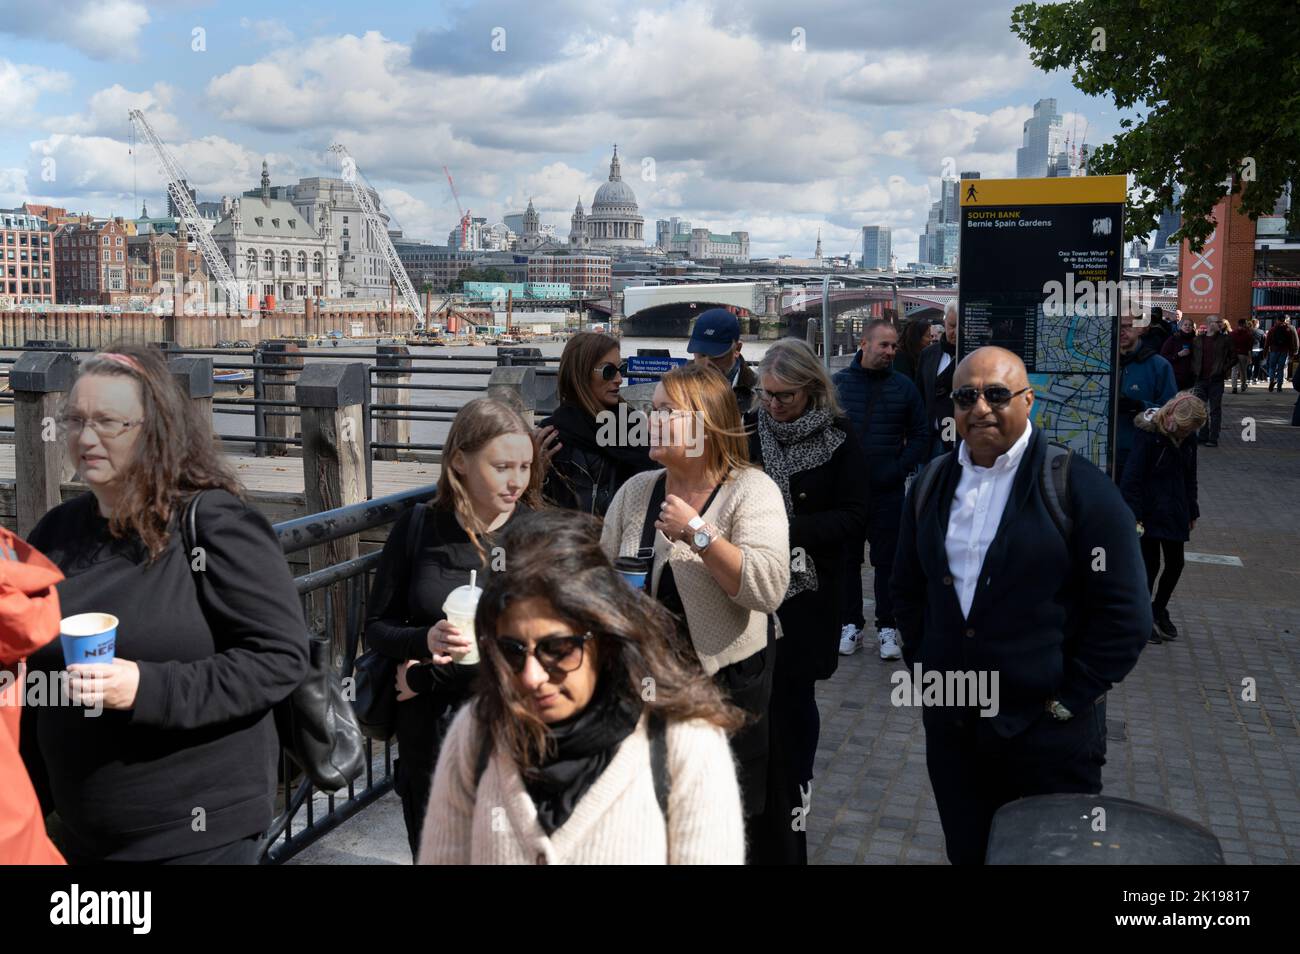 Queue near Blackfriars Bridge waiting to see Queen Elizabeth 11 lying-in-state in Westminster Hall, London. Stock Photo